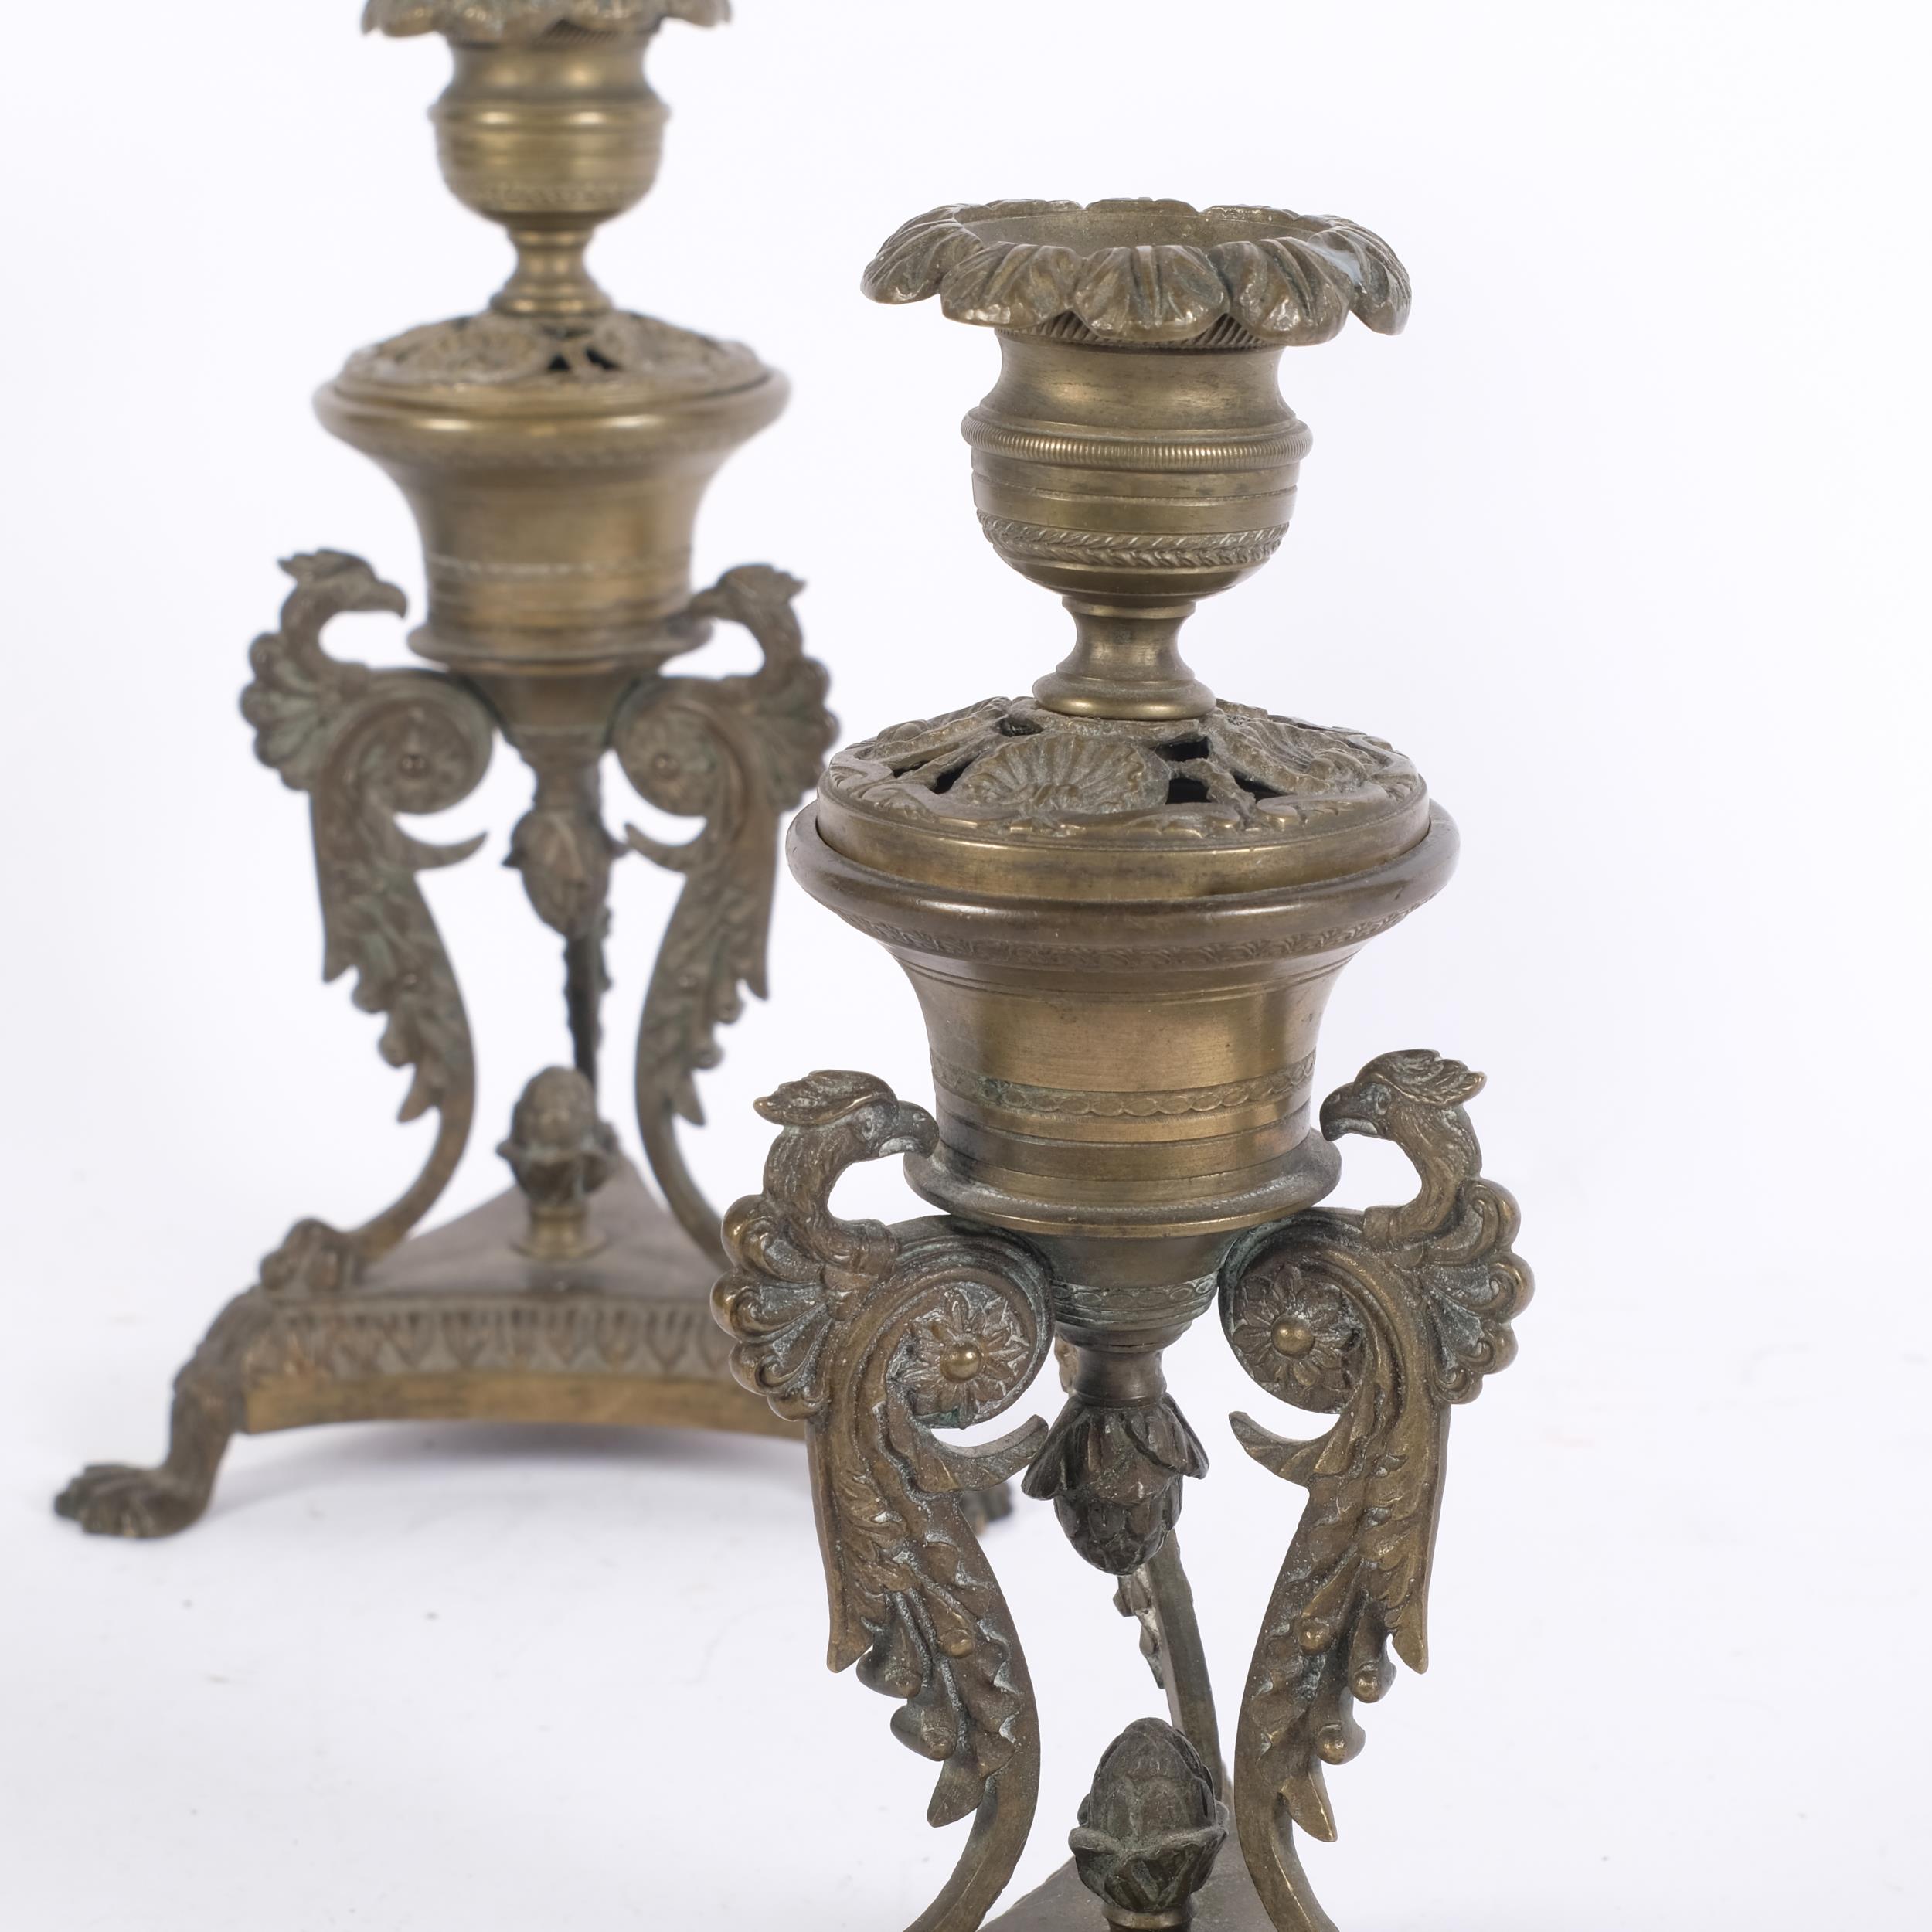 A pair of ornate Antique brass candlesticks of Classical design, H19.5cm - Image 2 of 2